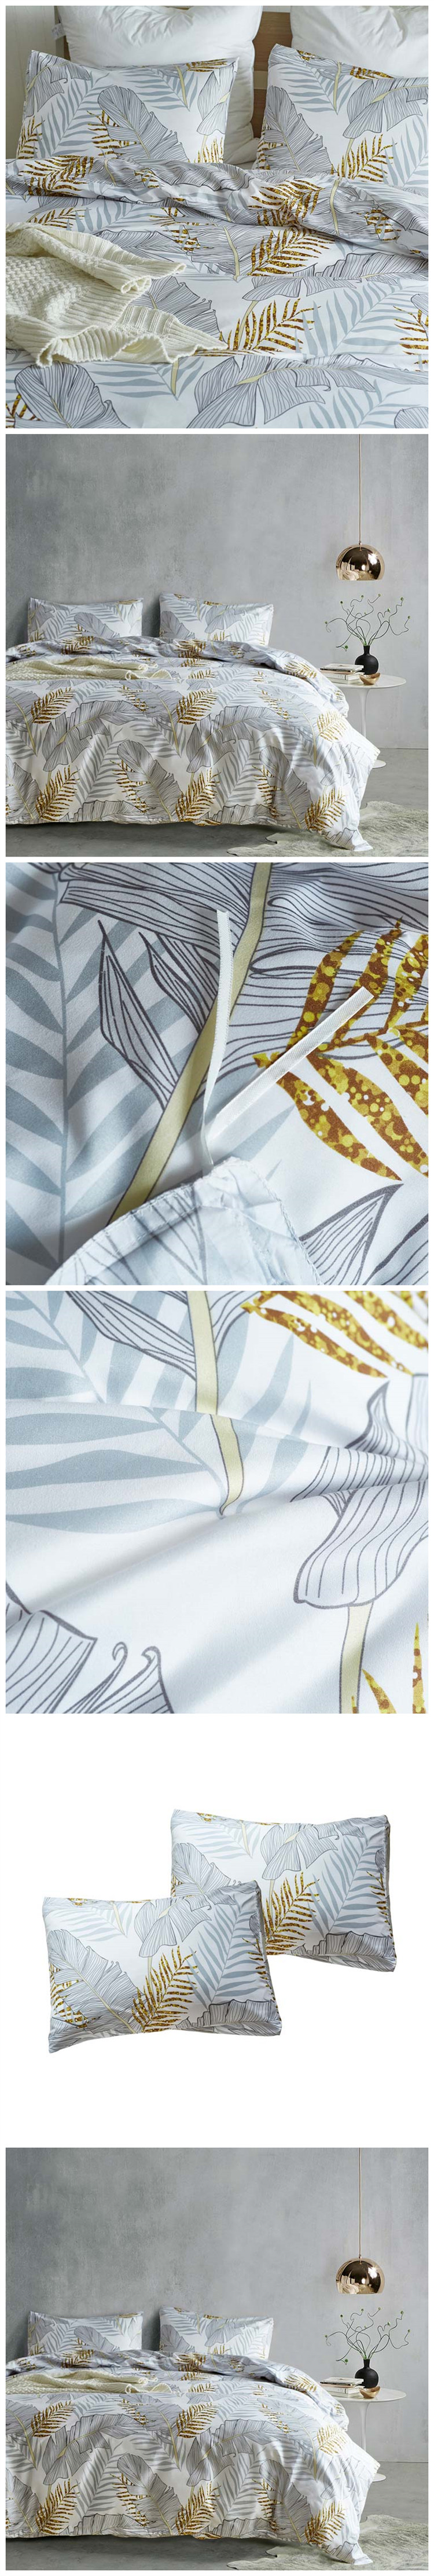 China Supplier Wholesale product Printed Bedding Set